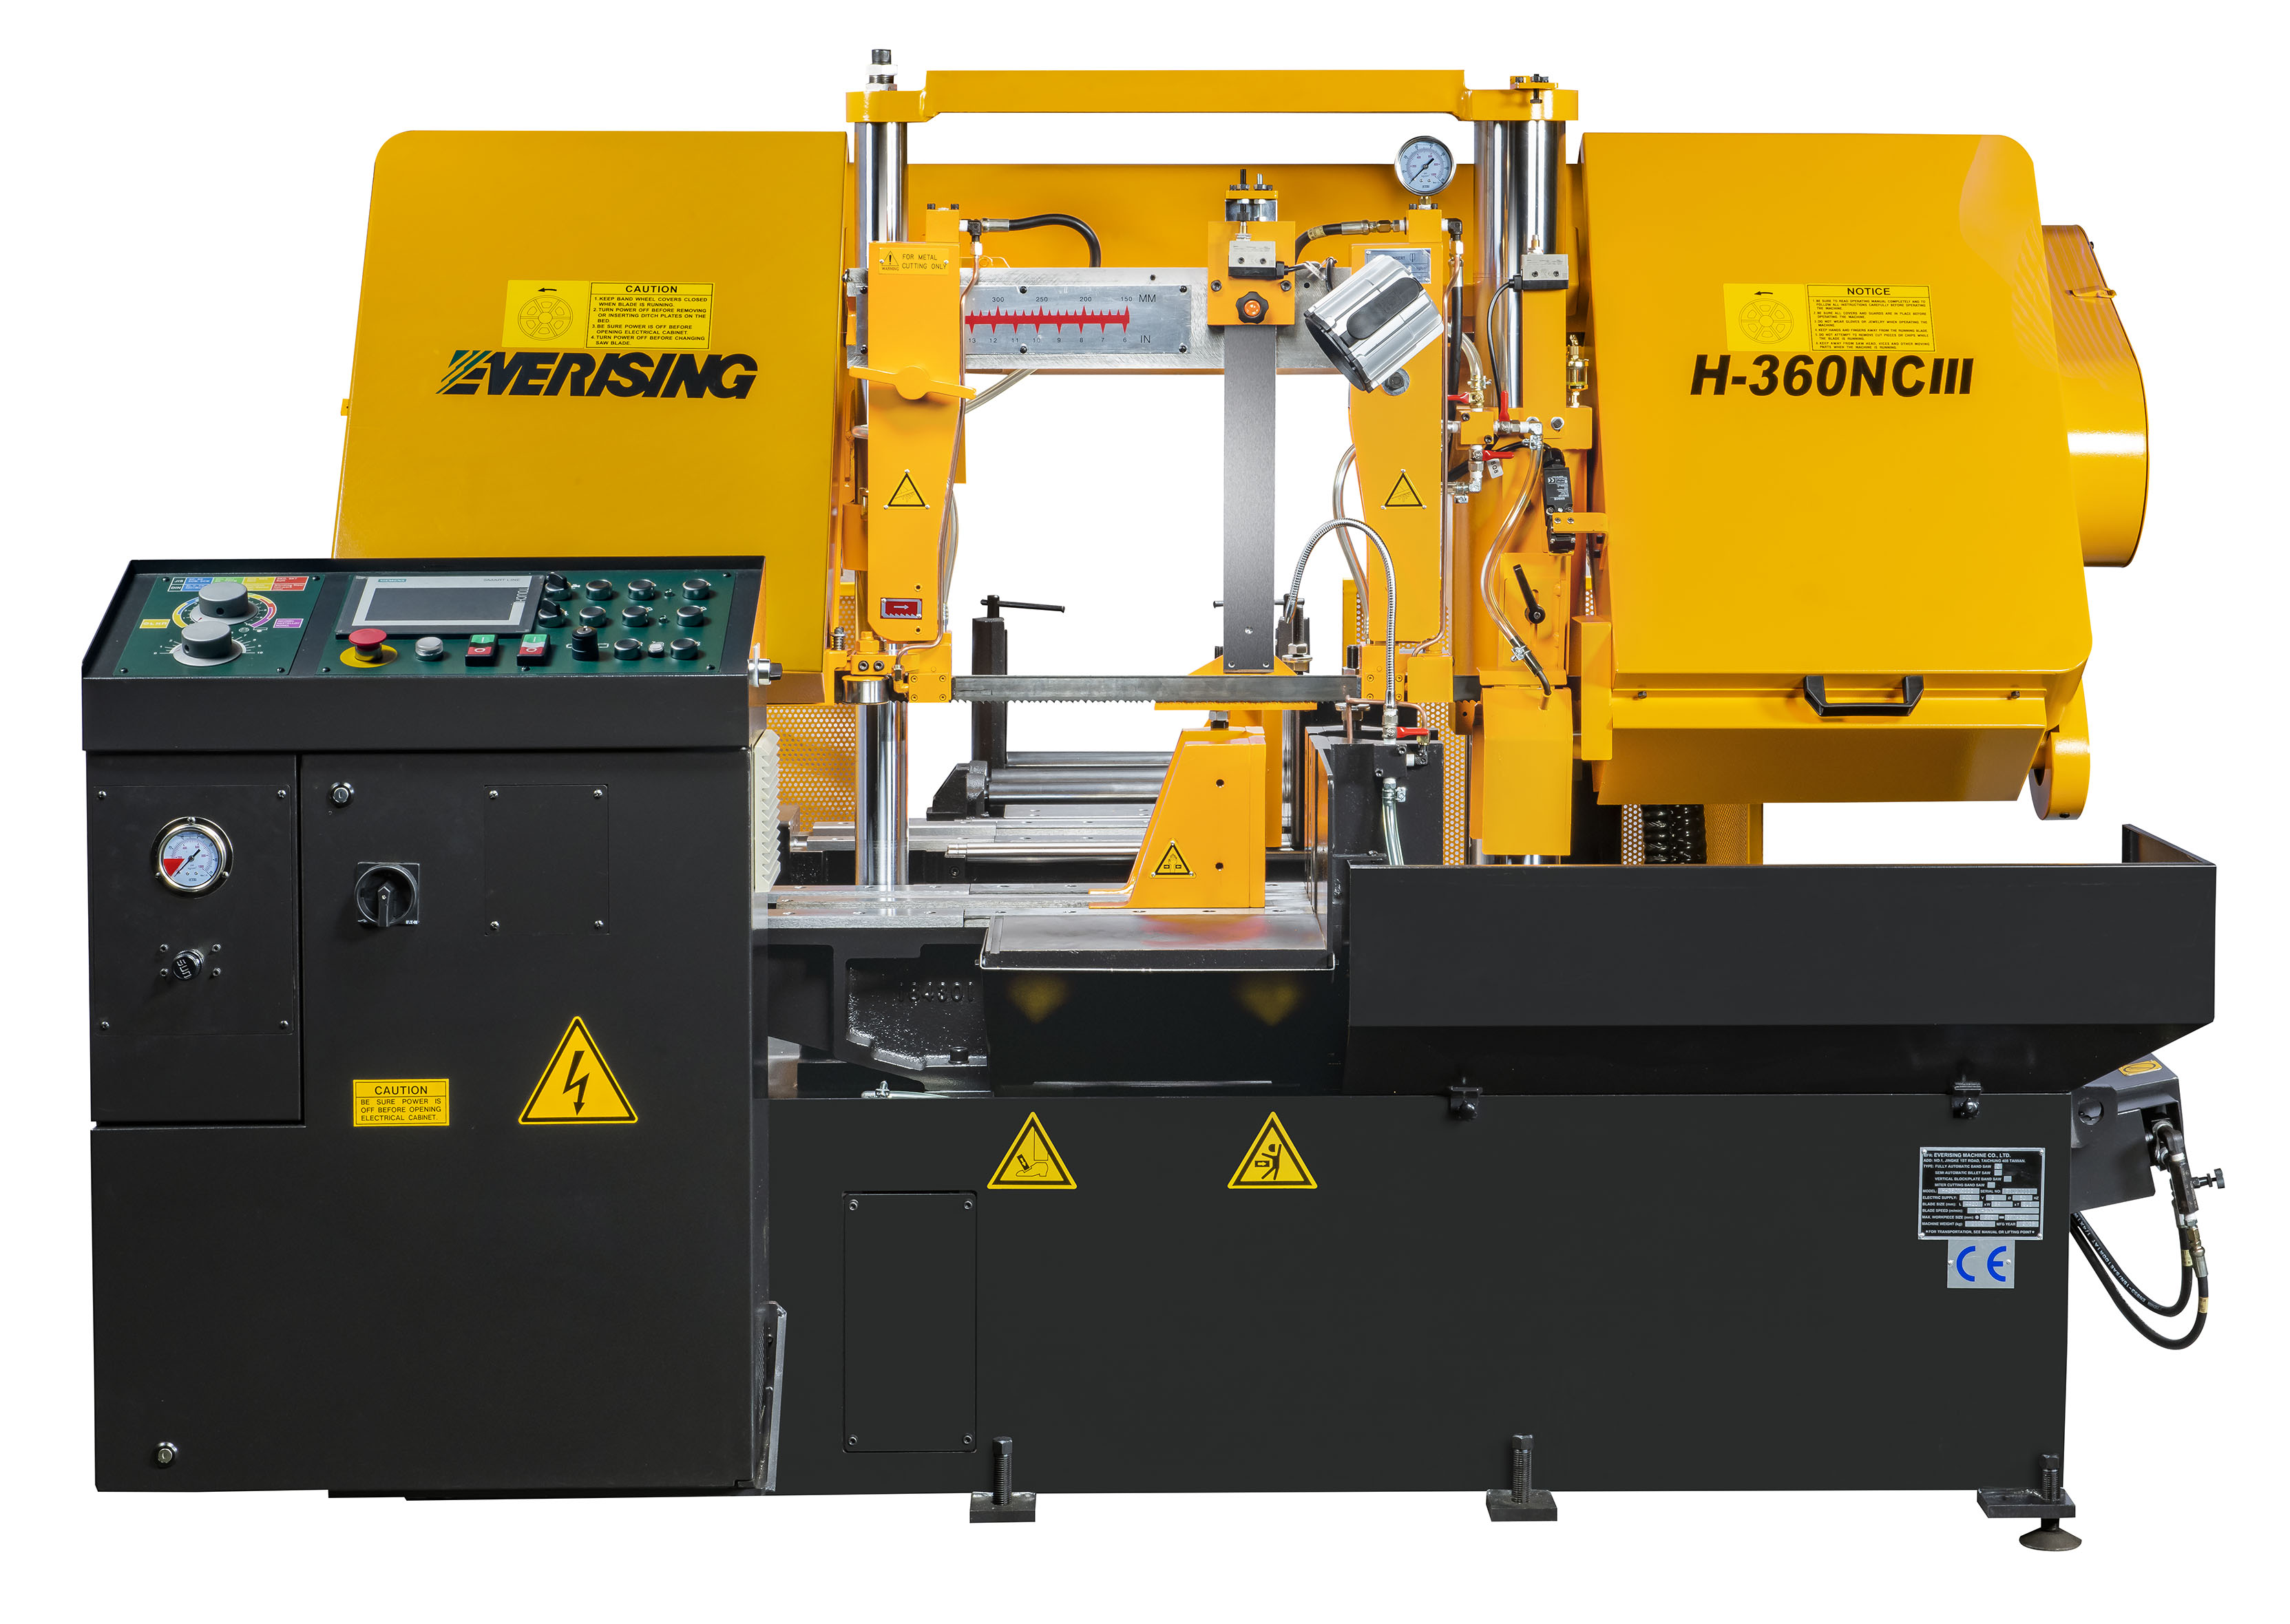 Products|Fully Automatic Band Saws - H-360NCIII